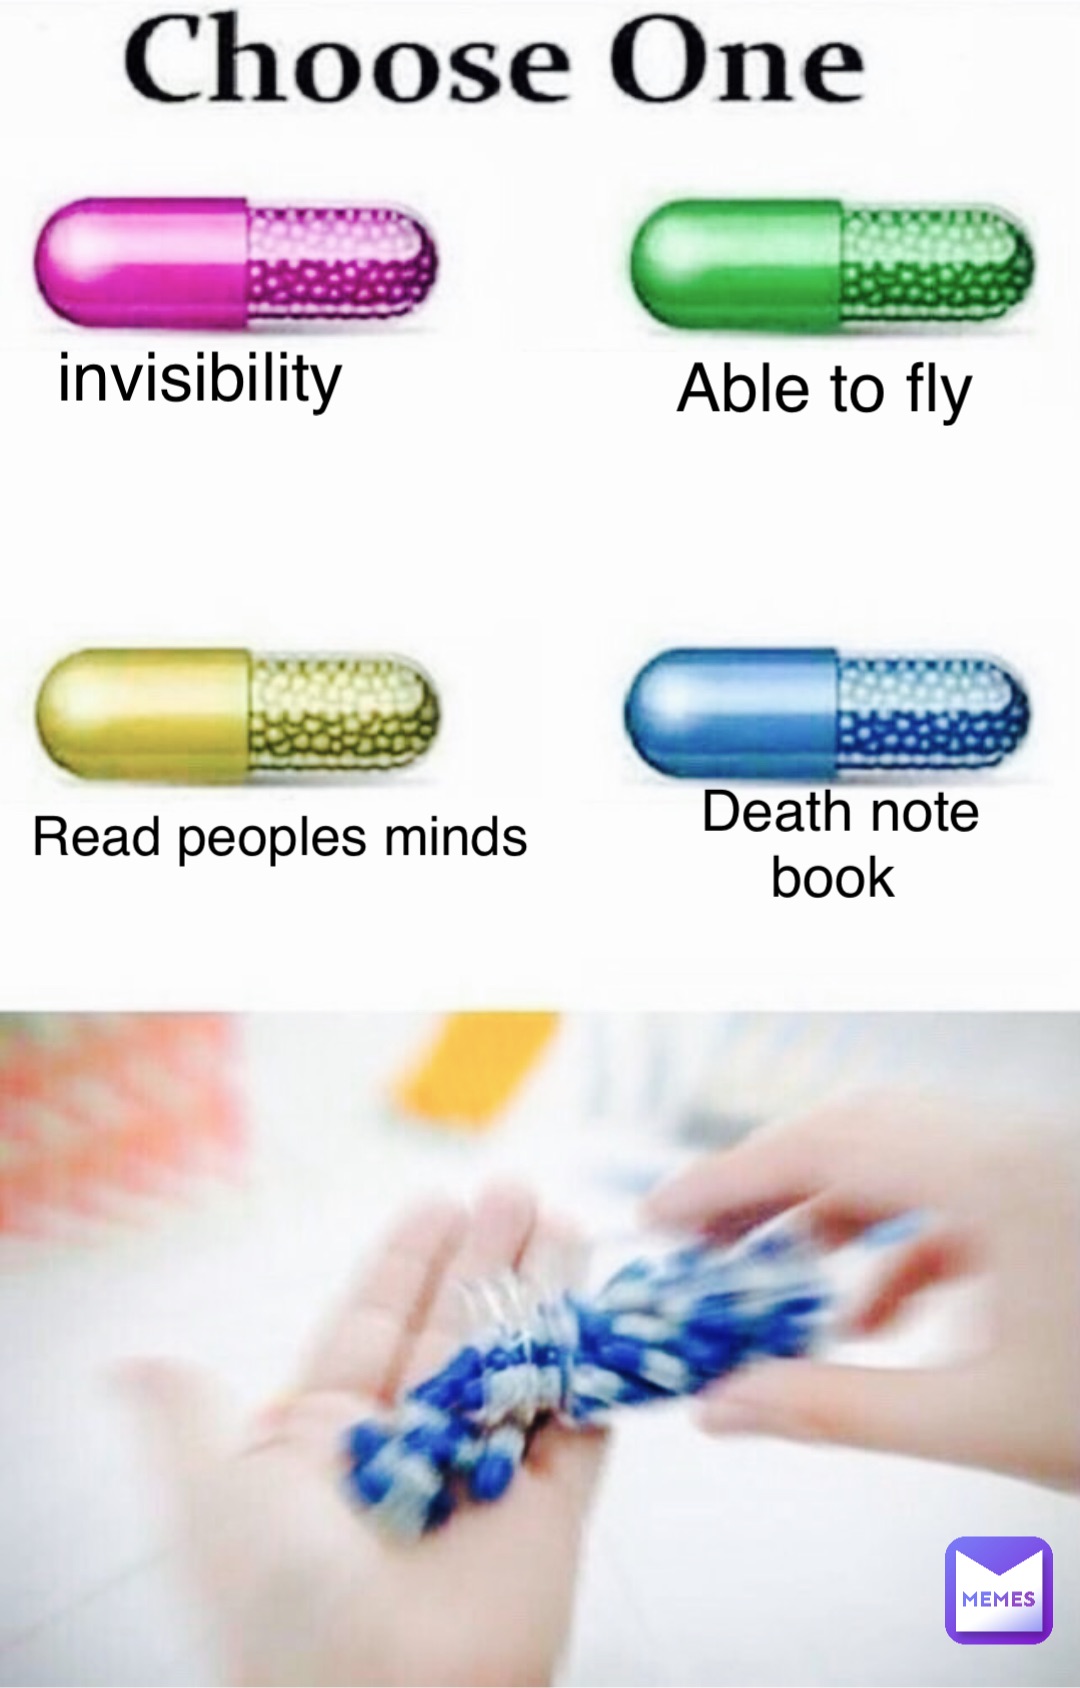 Death note book Able to fly Read peoples minds invisibility